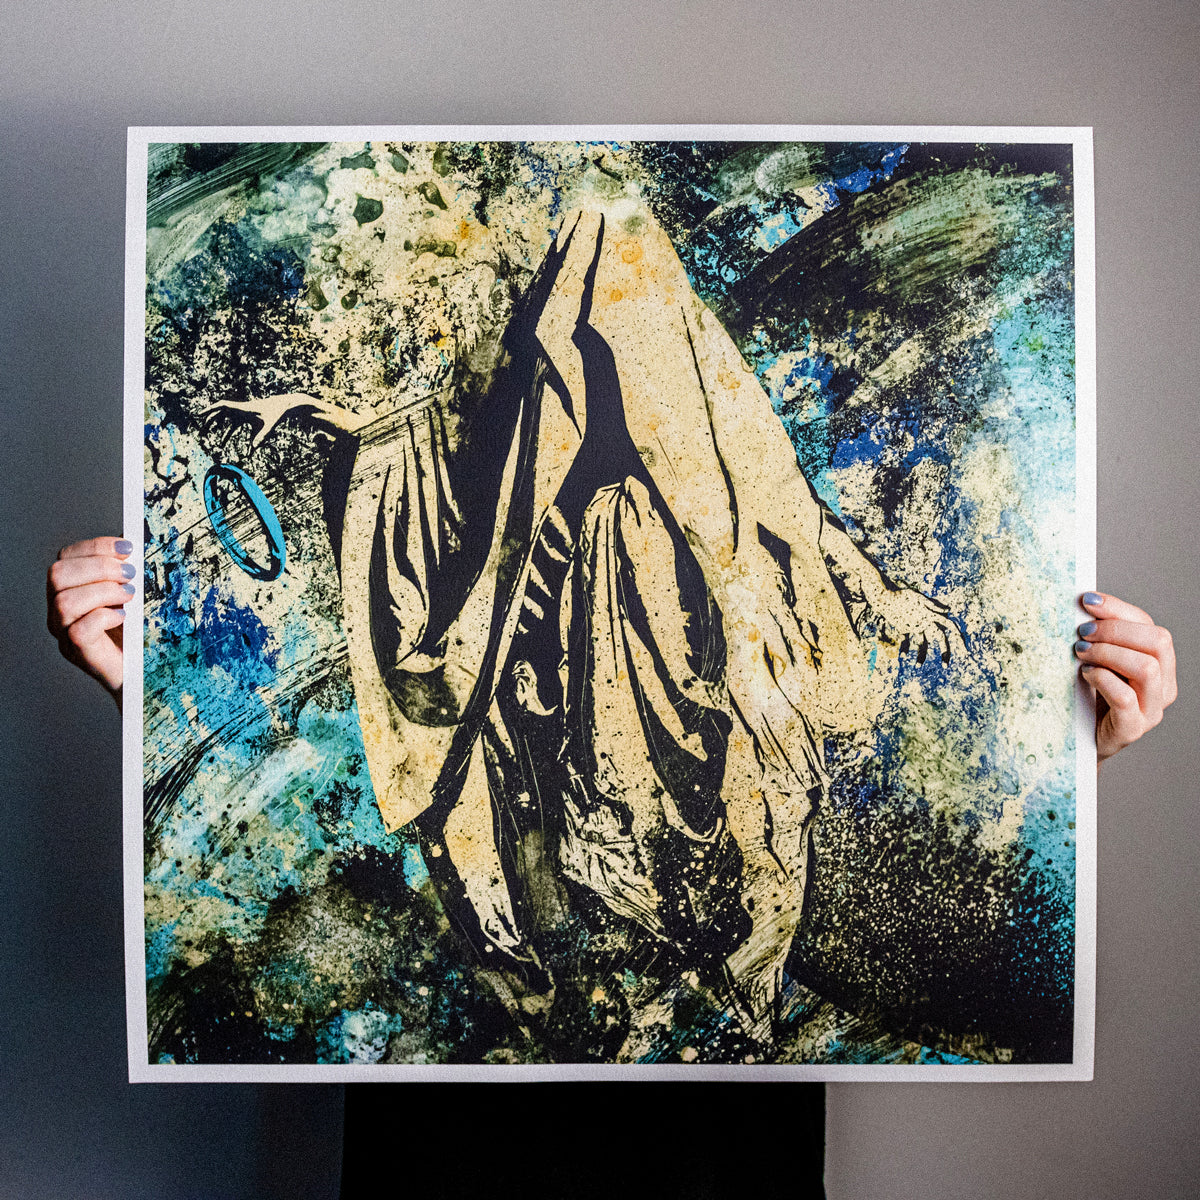 J. Bannon "The Boundless Black: Reaper" Limited Print